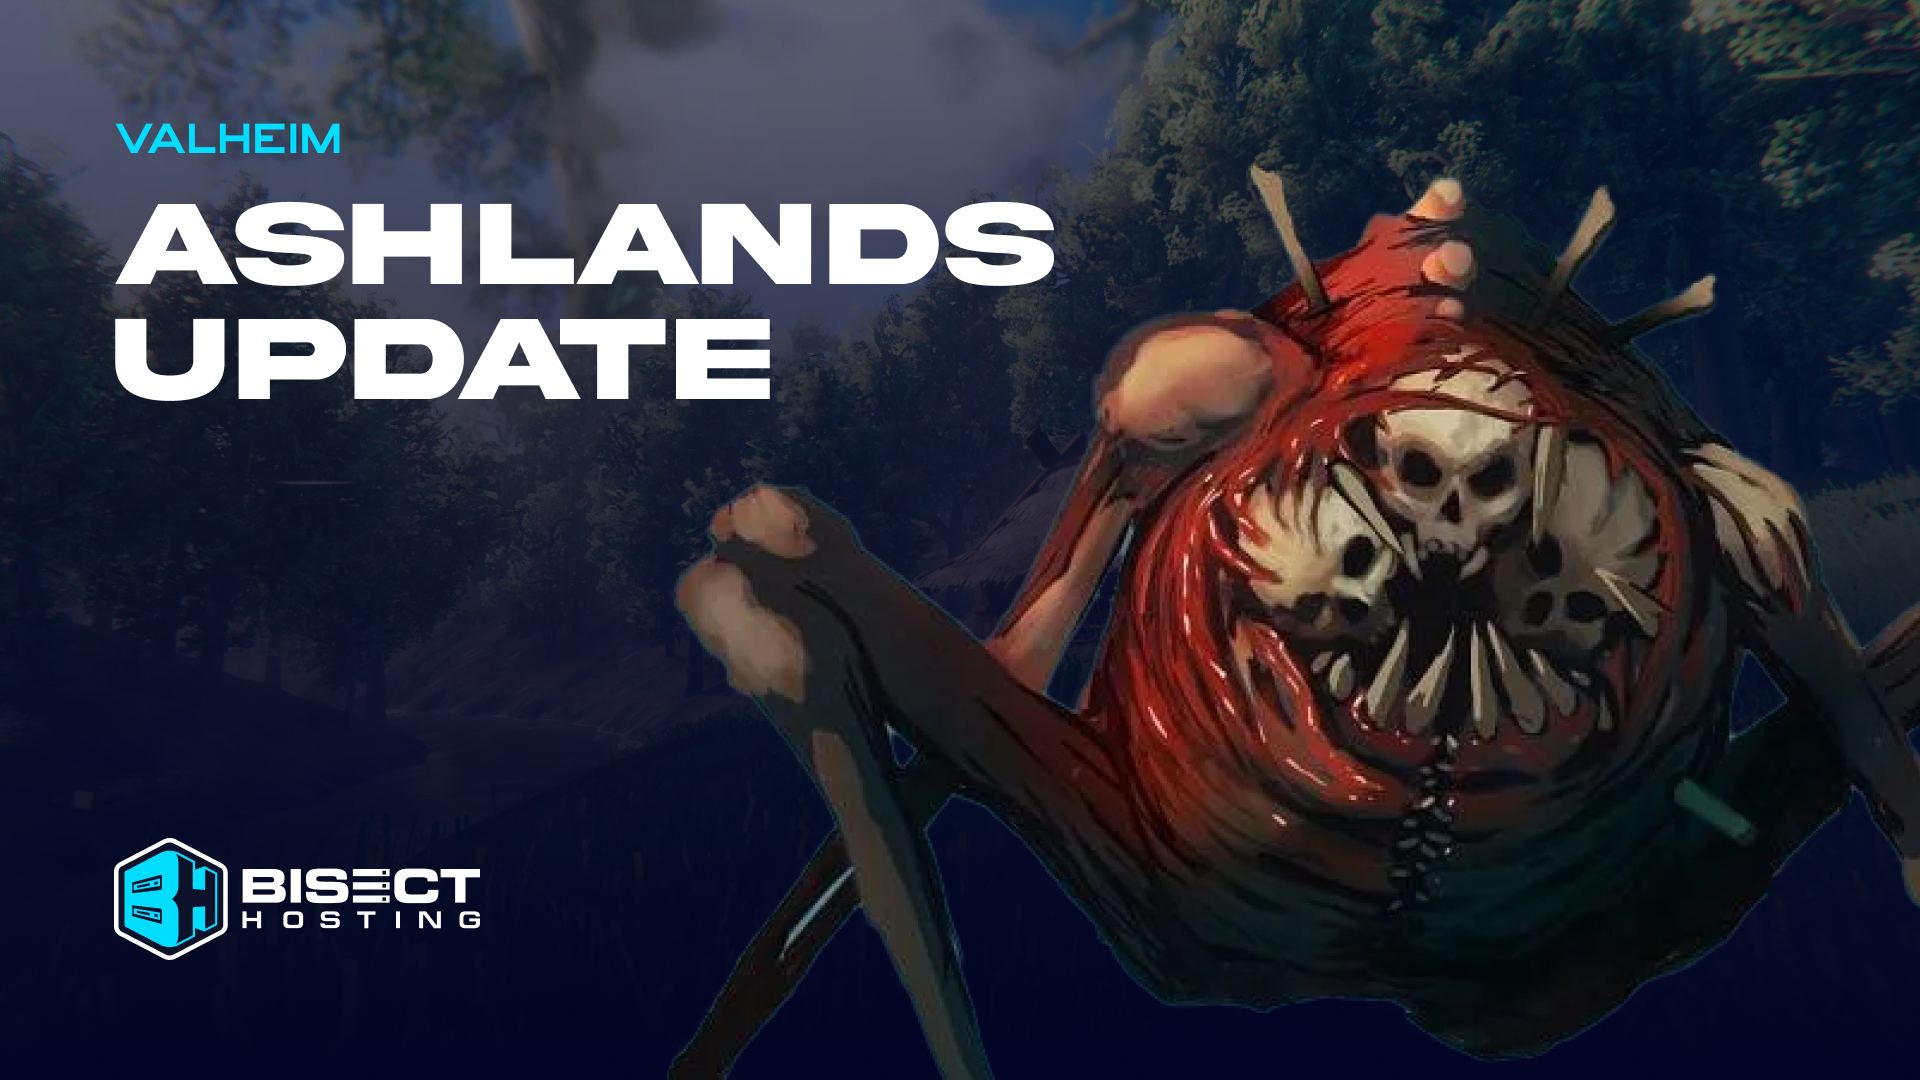 Valheim Ashlands Update: Release Date, Patch Notes, & More